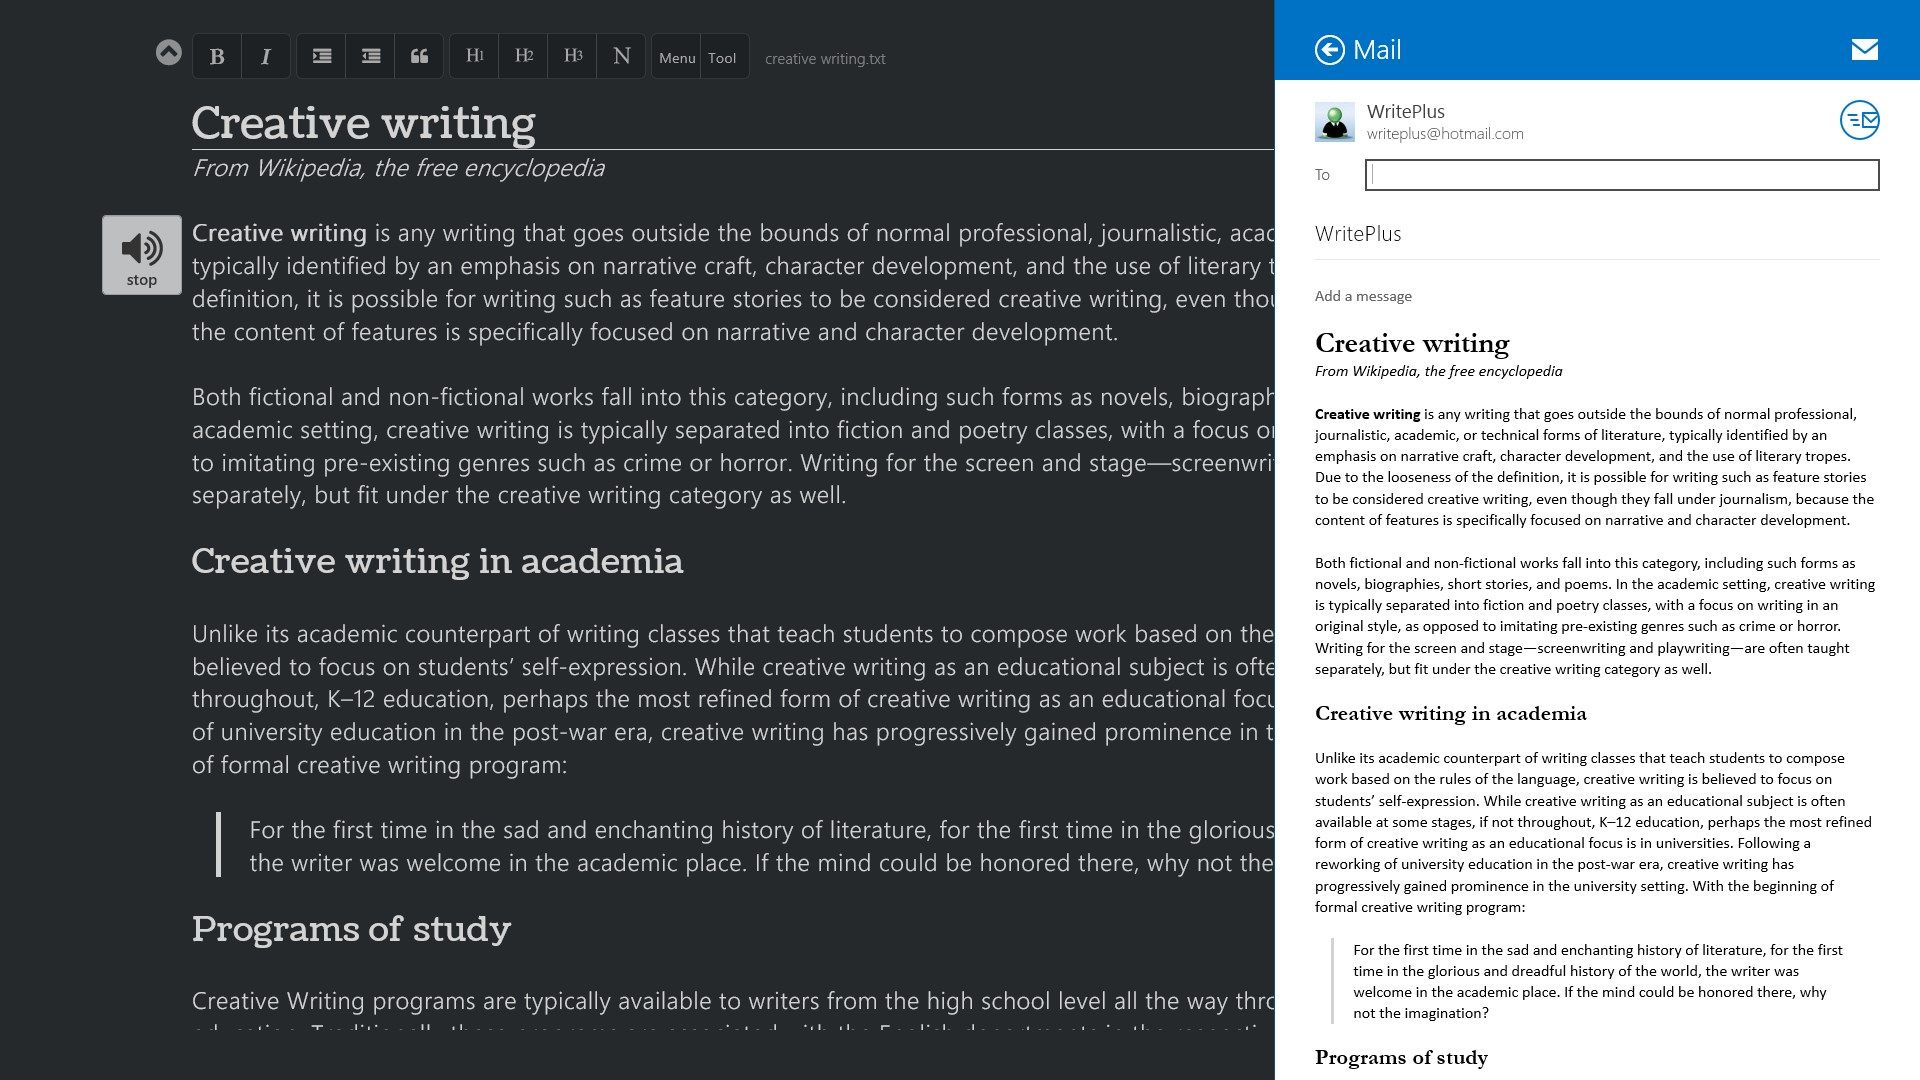 Share, dark theme and read text out (premium)